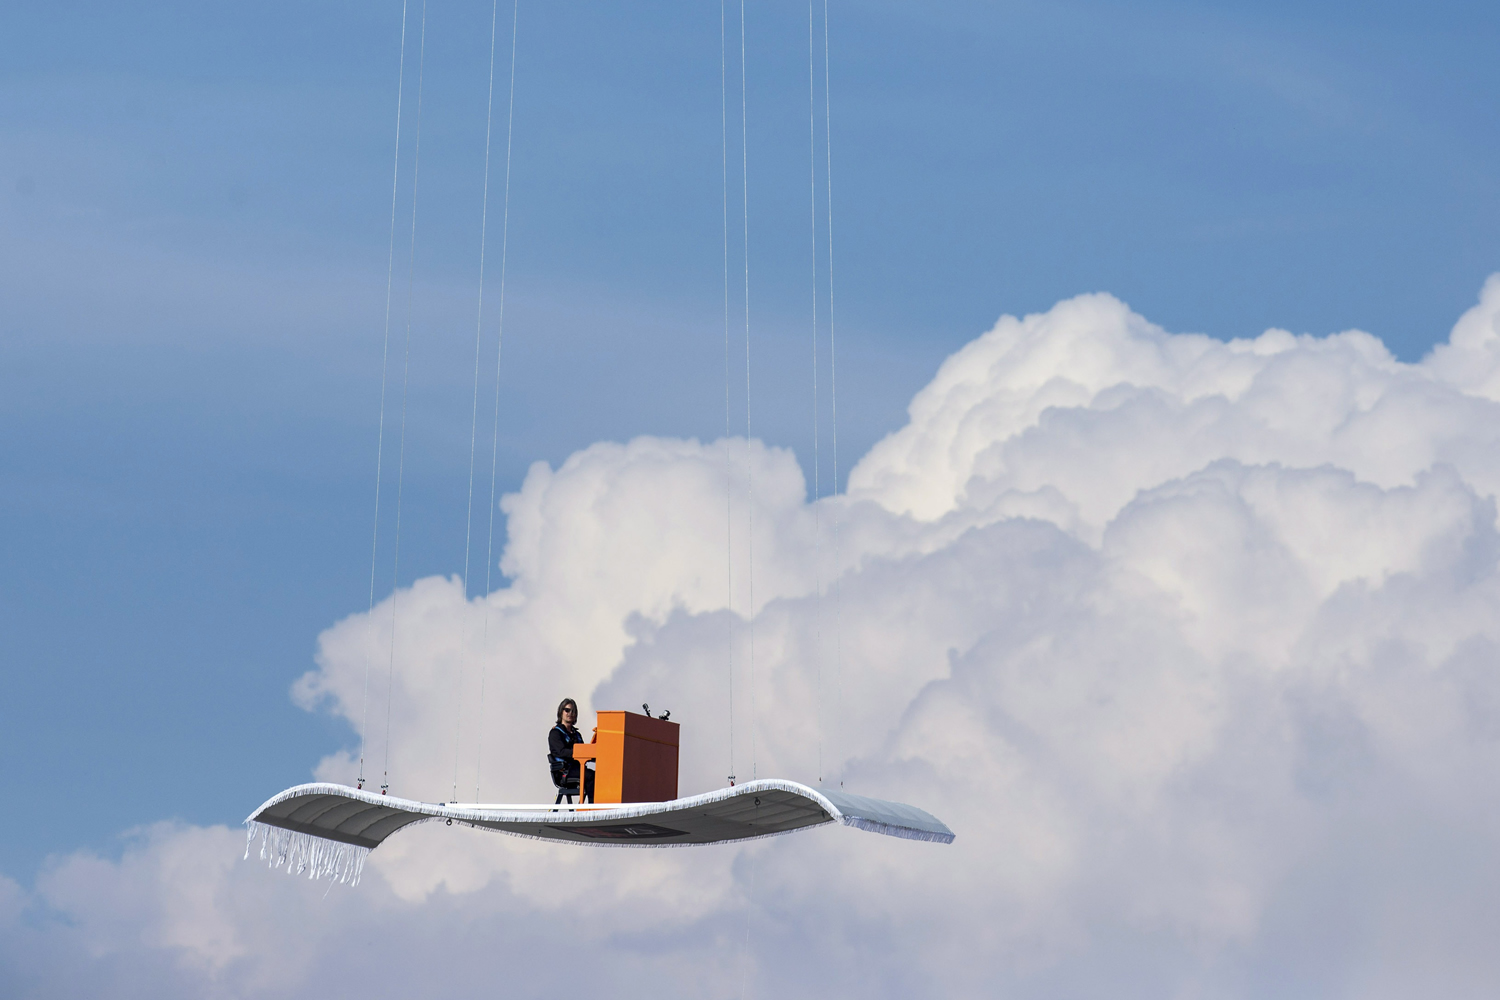 German pianist Stefan Aaron plays an orange piano on a "flying carpet" platform suspended from a helicopter, over the Munich airport in Germany on July 23. The concert is the fourth station of the "Orange Piano Tour", which brings the artist to places around the world.